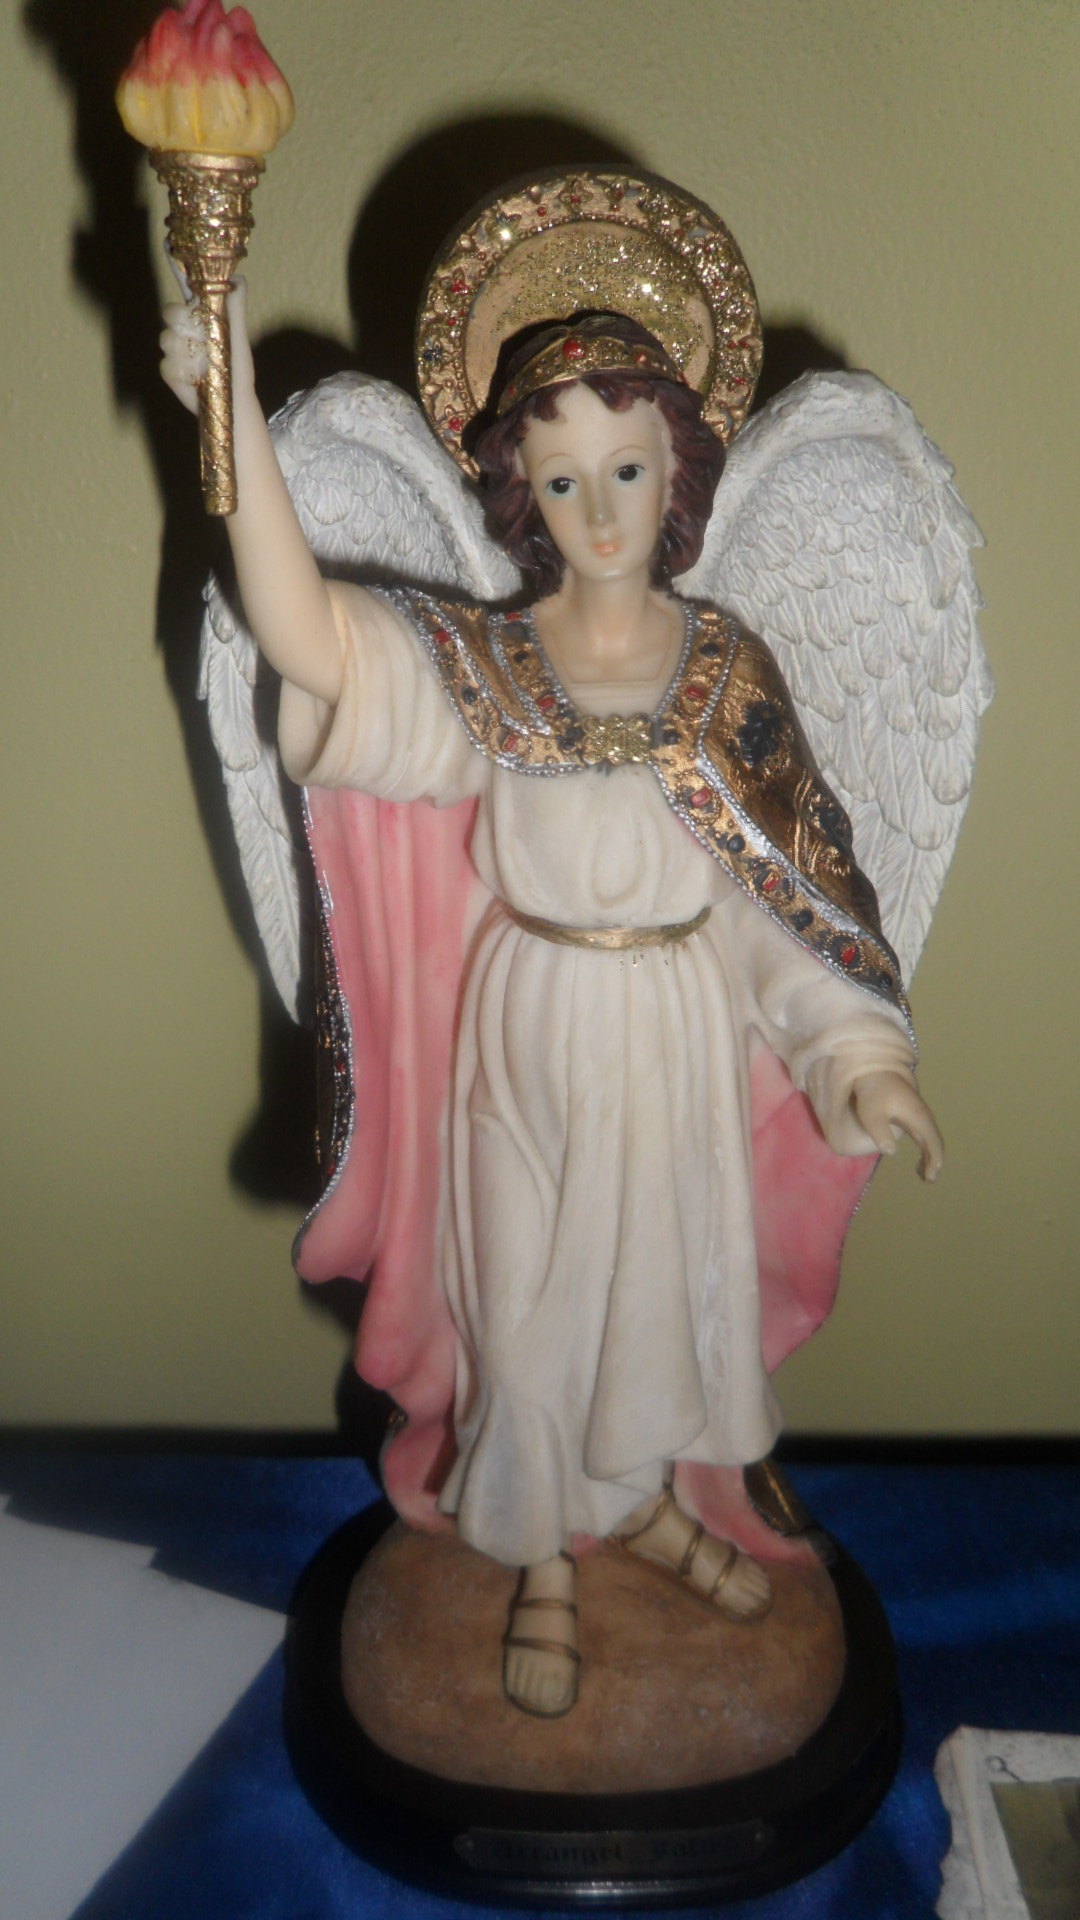 My first evocation of this Archangel goes back a long way and he has been a